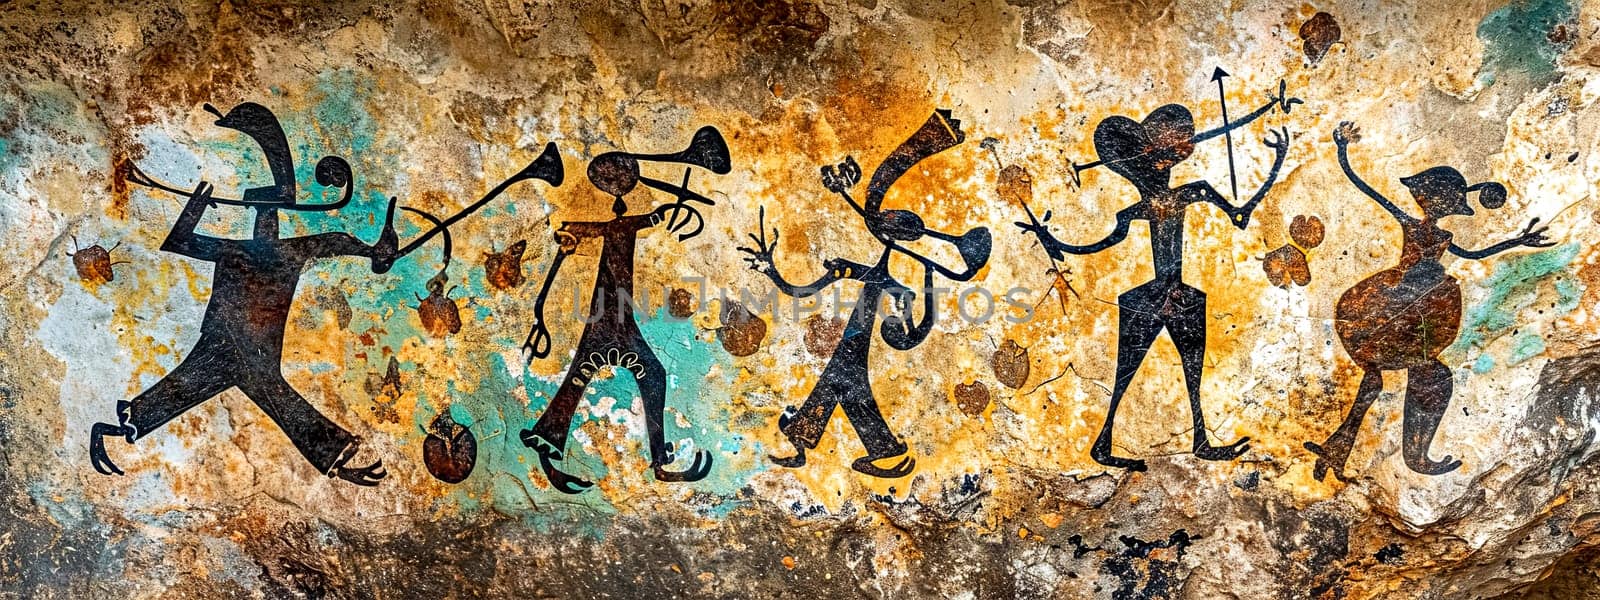 musicians with instruments, resembling ancient cave paintings, set against a rugged, multicolored stone background. by Edophoto